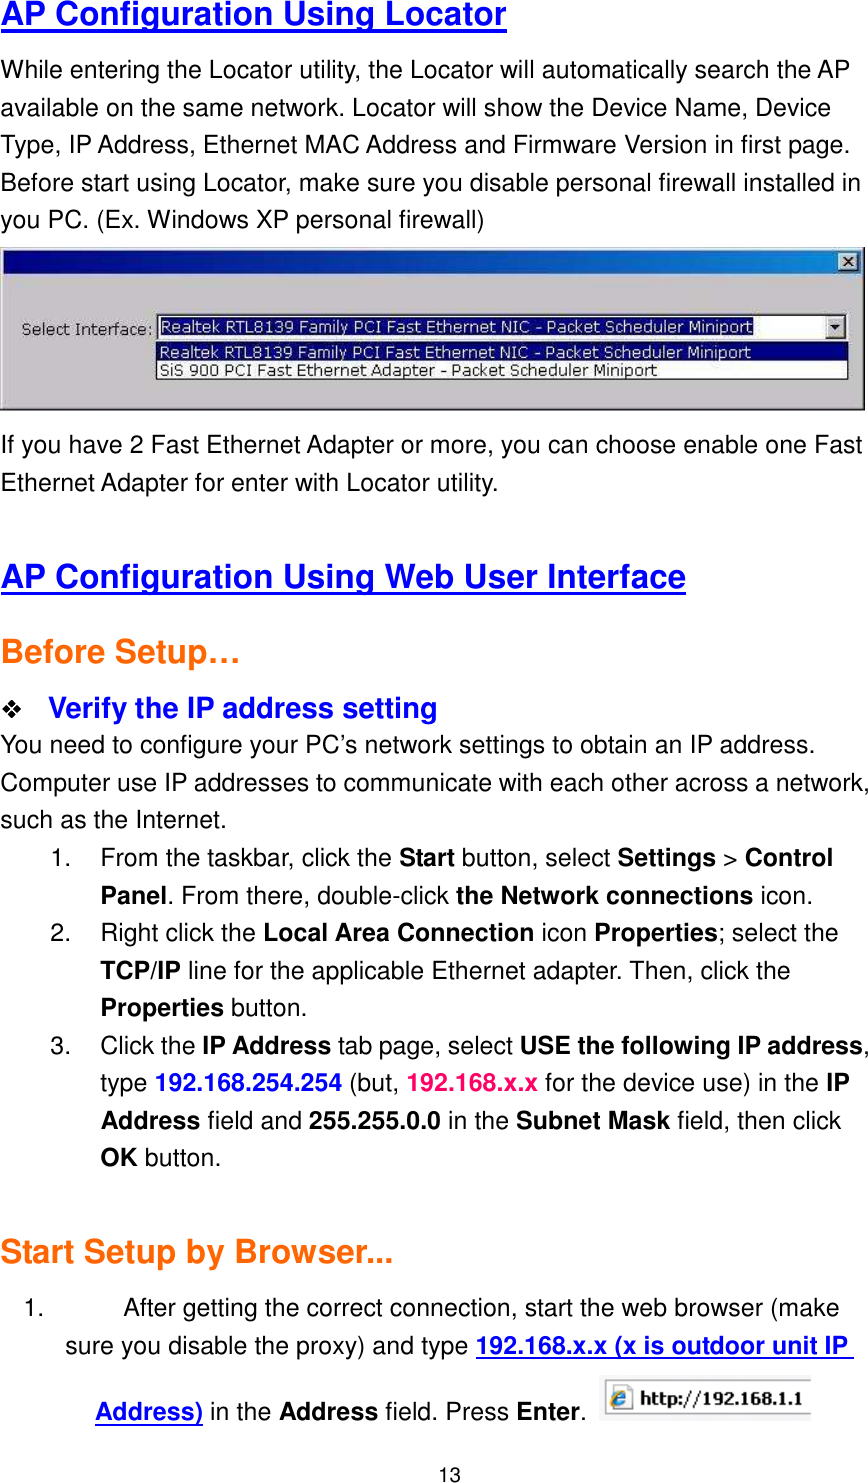  13 AP Configuration Using Locator While entering the Locator utility, the Locator will automatically search the AP available on the same network. Locator will show the Device Name, Device Type, IP Address, Ethernet MAC Address and Firmware Version in first page. Before start using Locator, make sure you disable personal firewall installed in you PC. (Ex. Windows XP personal firewall)  If you have 2 Fast Ethernet Adapter or more, you can choose enable one Fast Ethernet Adapter for enter with Locator utility.  AP Configuration Using Web User Interface Before Setup…    Verify the IP address setting You need to configure your PC’s network settings to obtain an IP address. Computer use IP addresses to communicate with each other across a network, such as the Internet. 1.  From the taskbar, click the Start button, select Settings &gt; Control Panel. From there, double-click the Network connections icon. 2.  Right click the Local Area Connection icon Properties; select the TCP/IP line for the applicable Ethernet adapter. Then, click the Properties button. 3.  Click the IP Address tab page, select USE the following IP address, type 192.168.254.254 (but, 192.168.x.x for the device use) in the IP Address field and 255.255.0.0 in the Subnet Mask field, then click OK button.  Start Setup by Browser... 1.  After getting the correct connection, start the web browser (make sure you disable the proxy) and type 192.168.x.x (x is outdoor unit IP Address) in the Address field. Press Enter.   